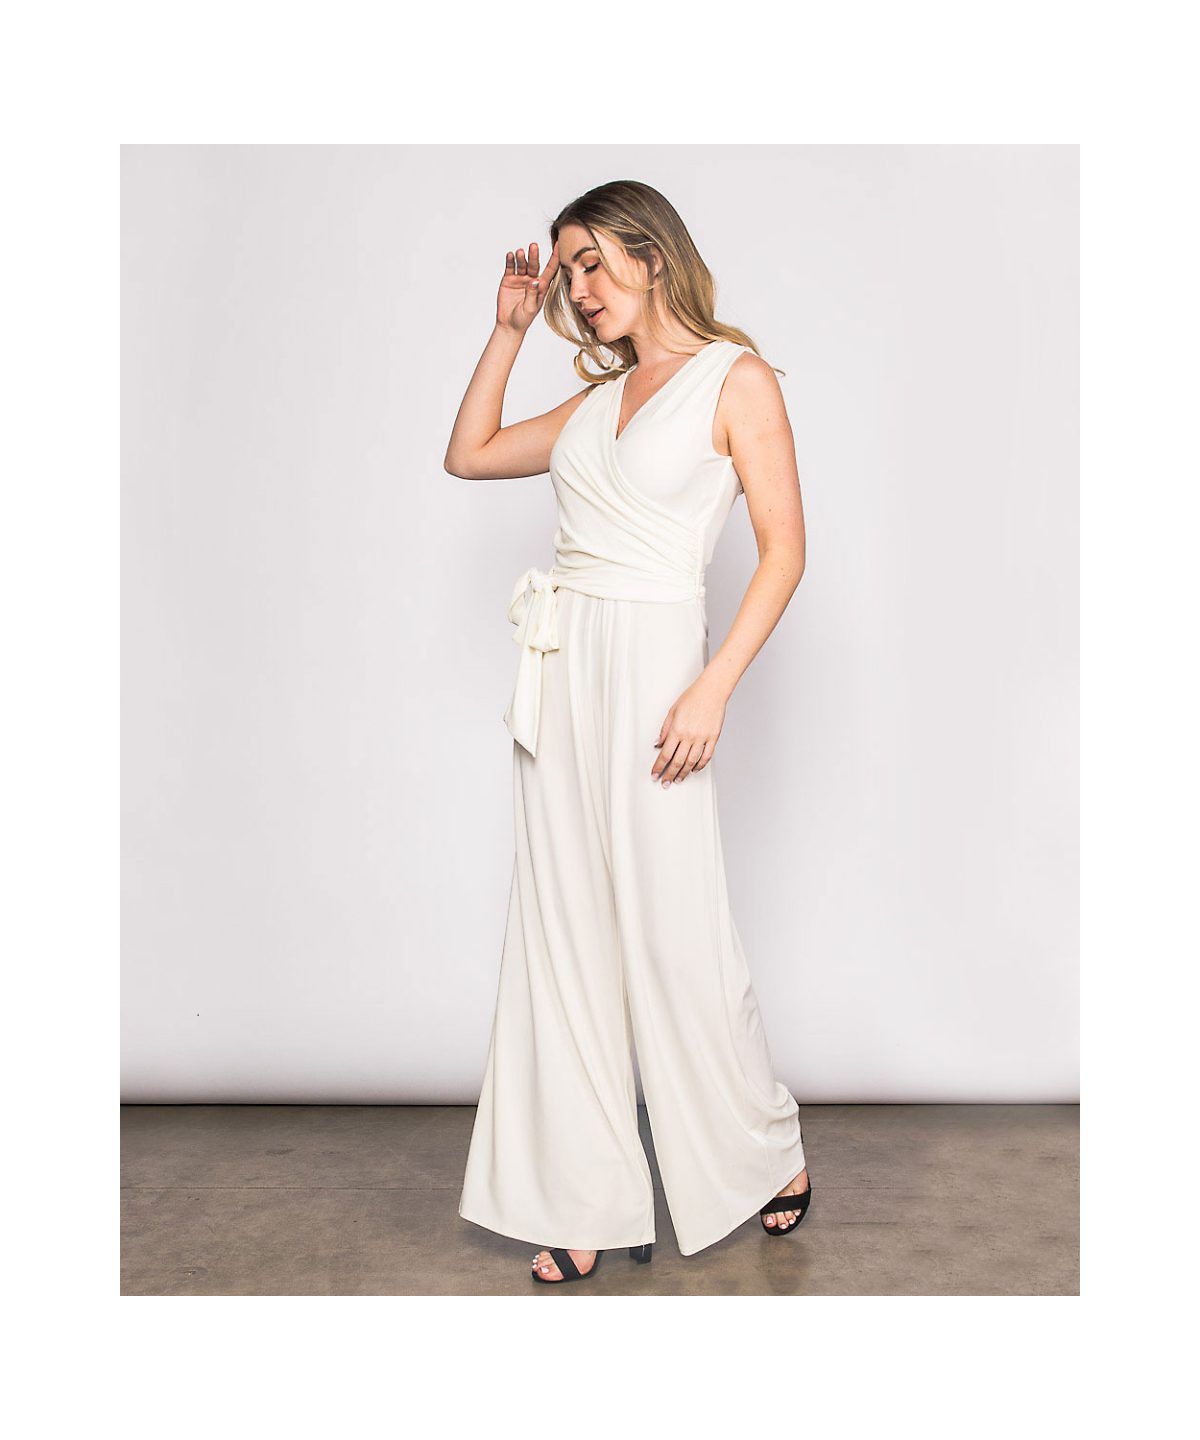 Last Tango MS522 Ivory Women's Jumpsuit | Ooh Ooh Shoes women's clothing and shoe boutique located in Naples and Mashpee